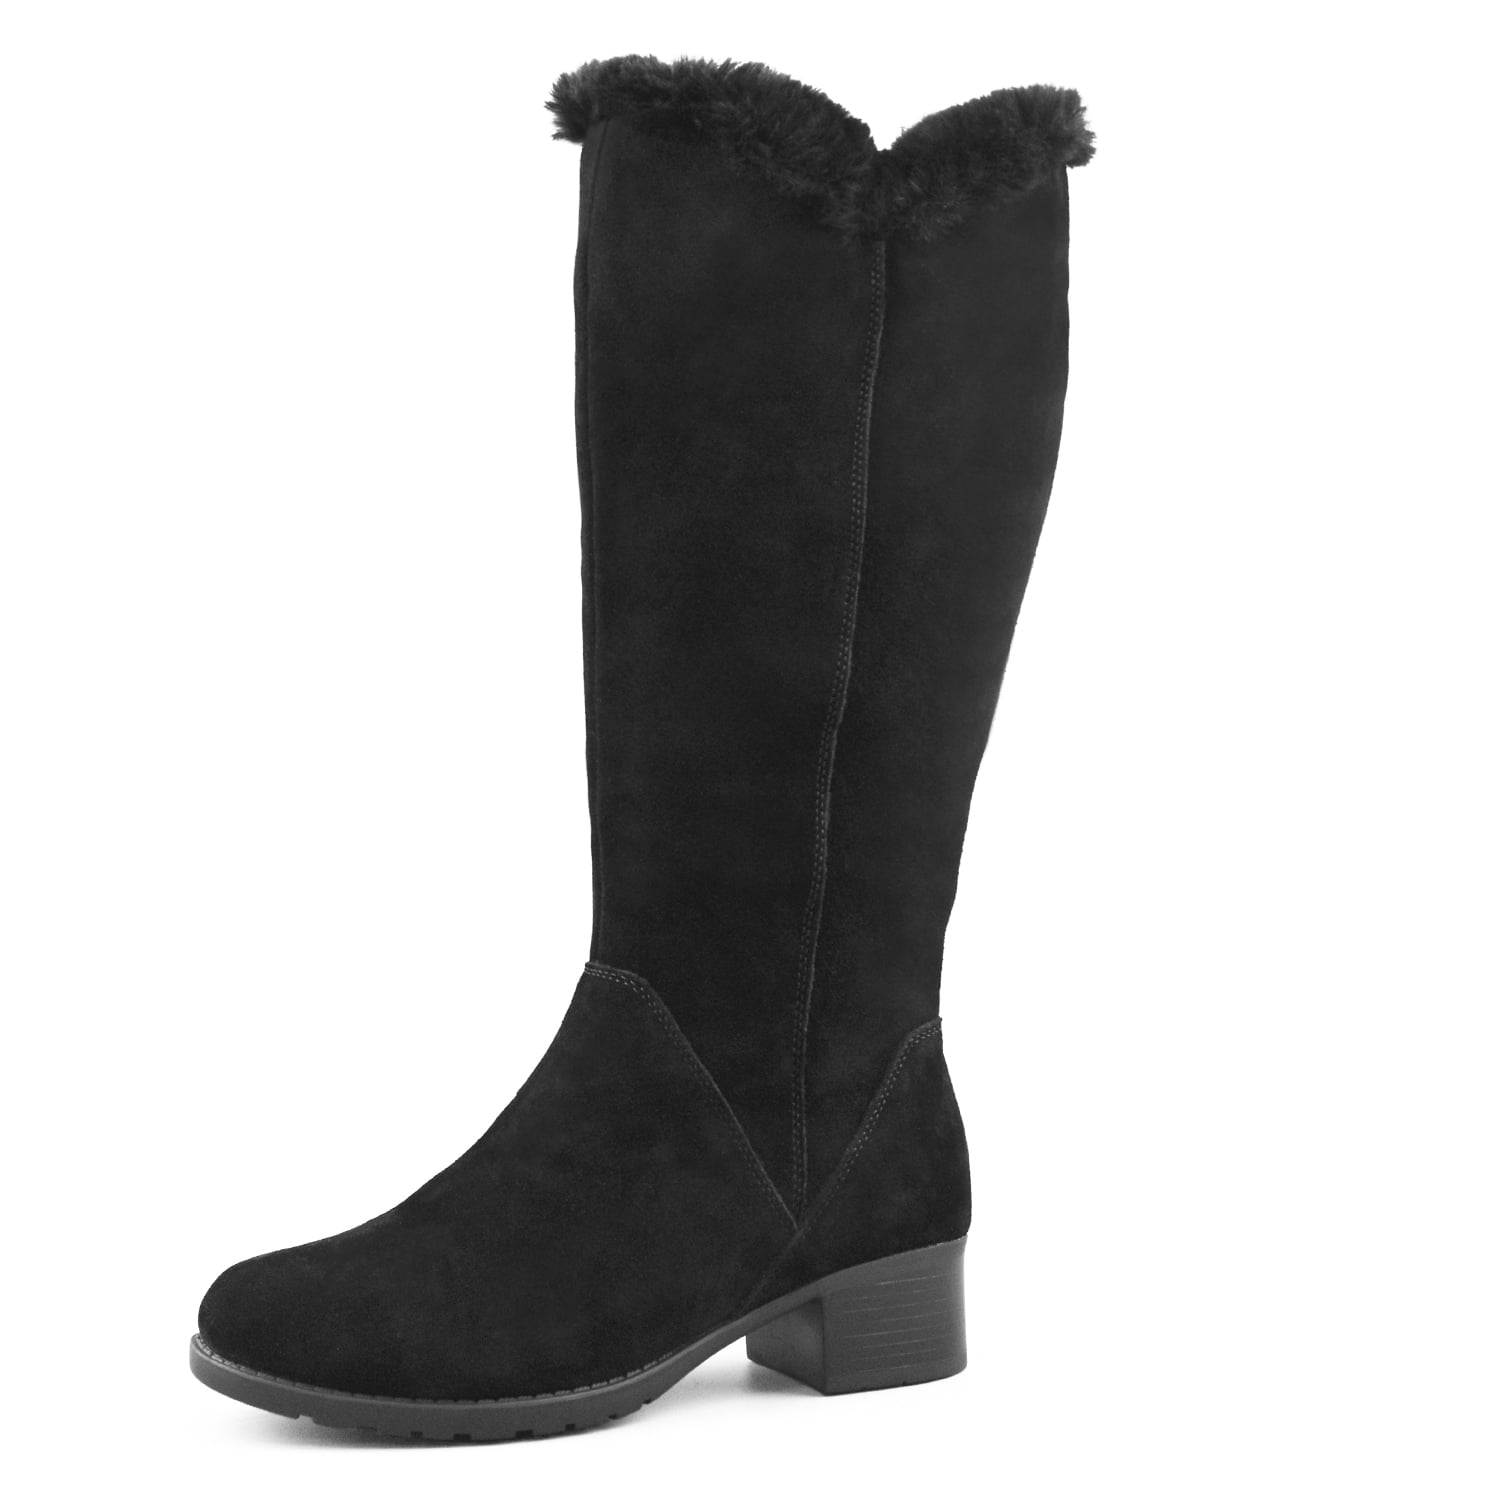 Comfy Moda Womens Tall Winter Boots Suede Leather Manhattan